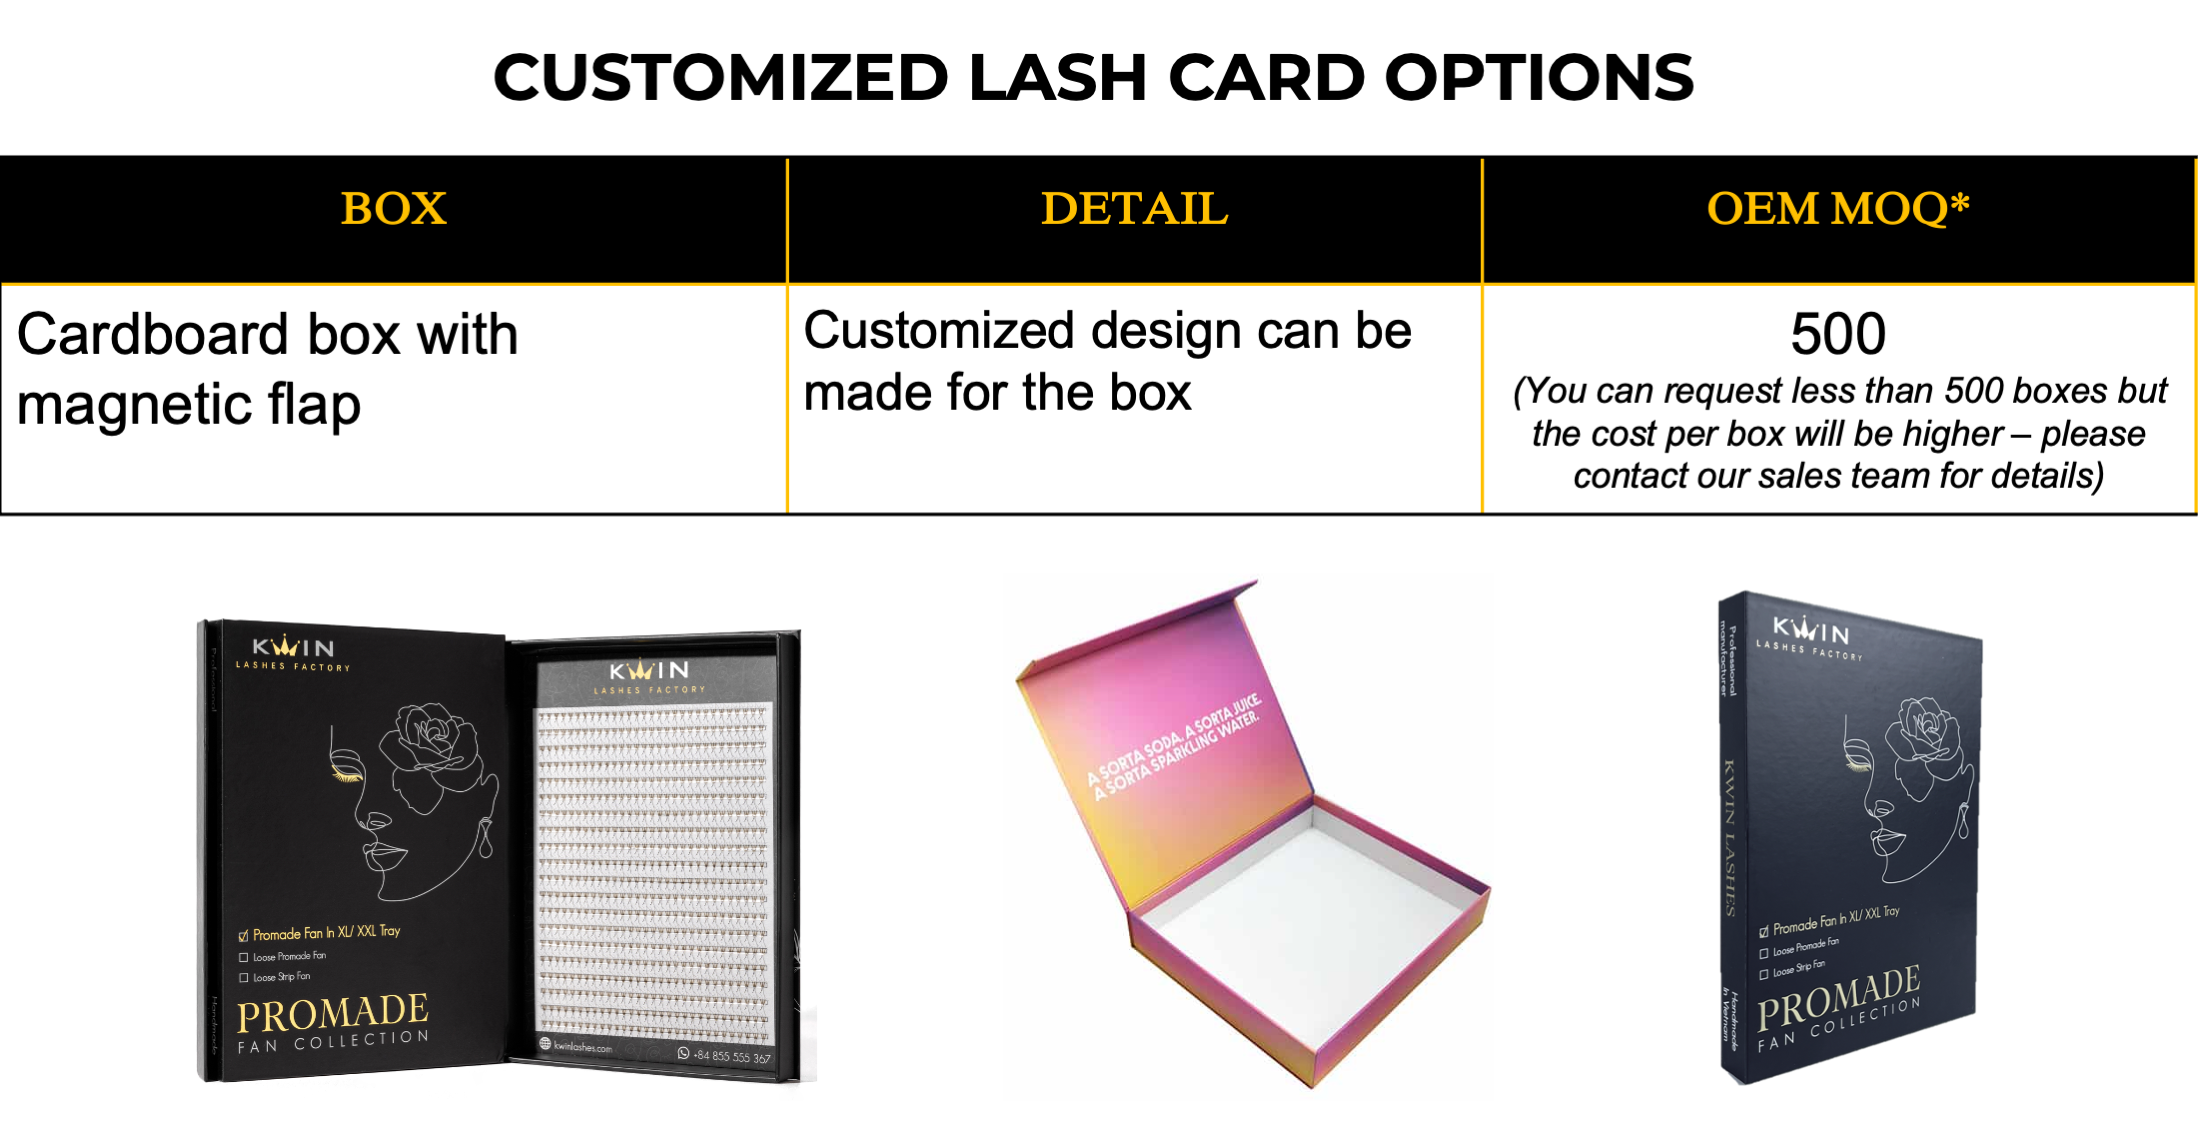 Customized Lash Boxes Options at Kwin Lashes